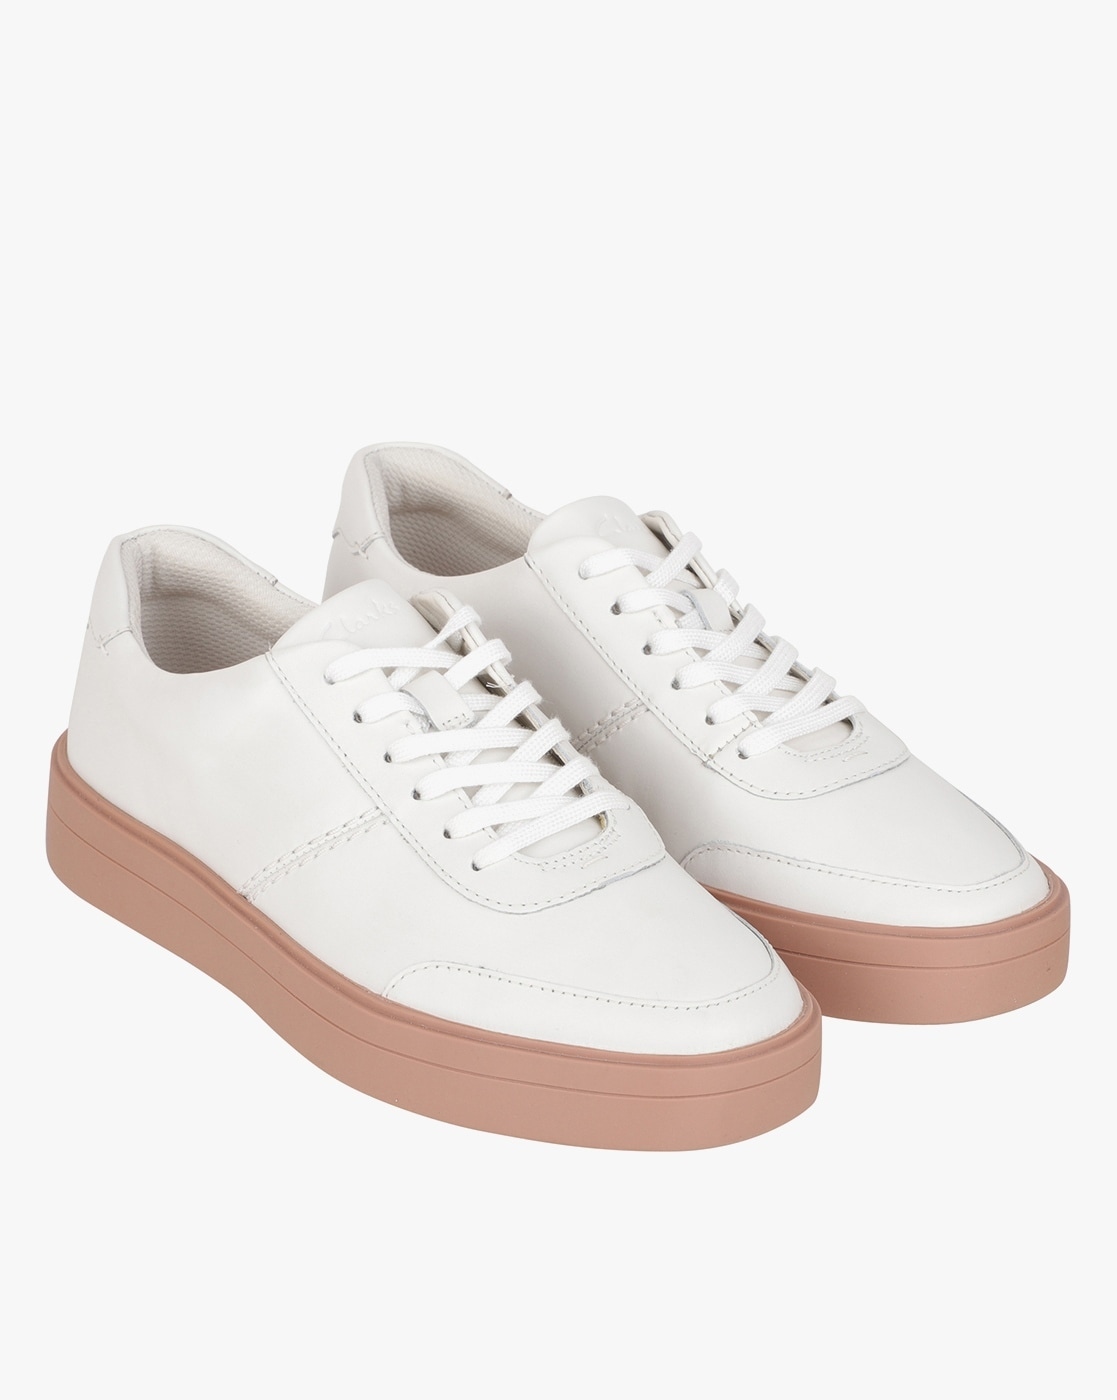 Buy Clarks Women White Leather Sneakers-3.5 UK (36 EU) (26148256) at  Amazon.in